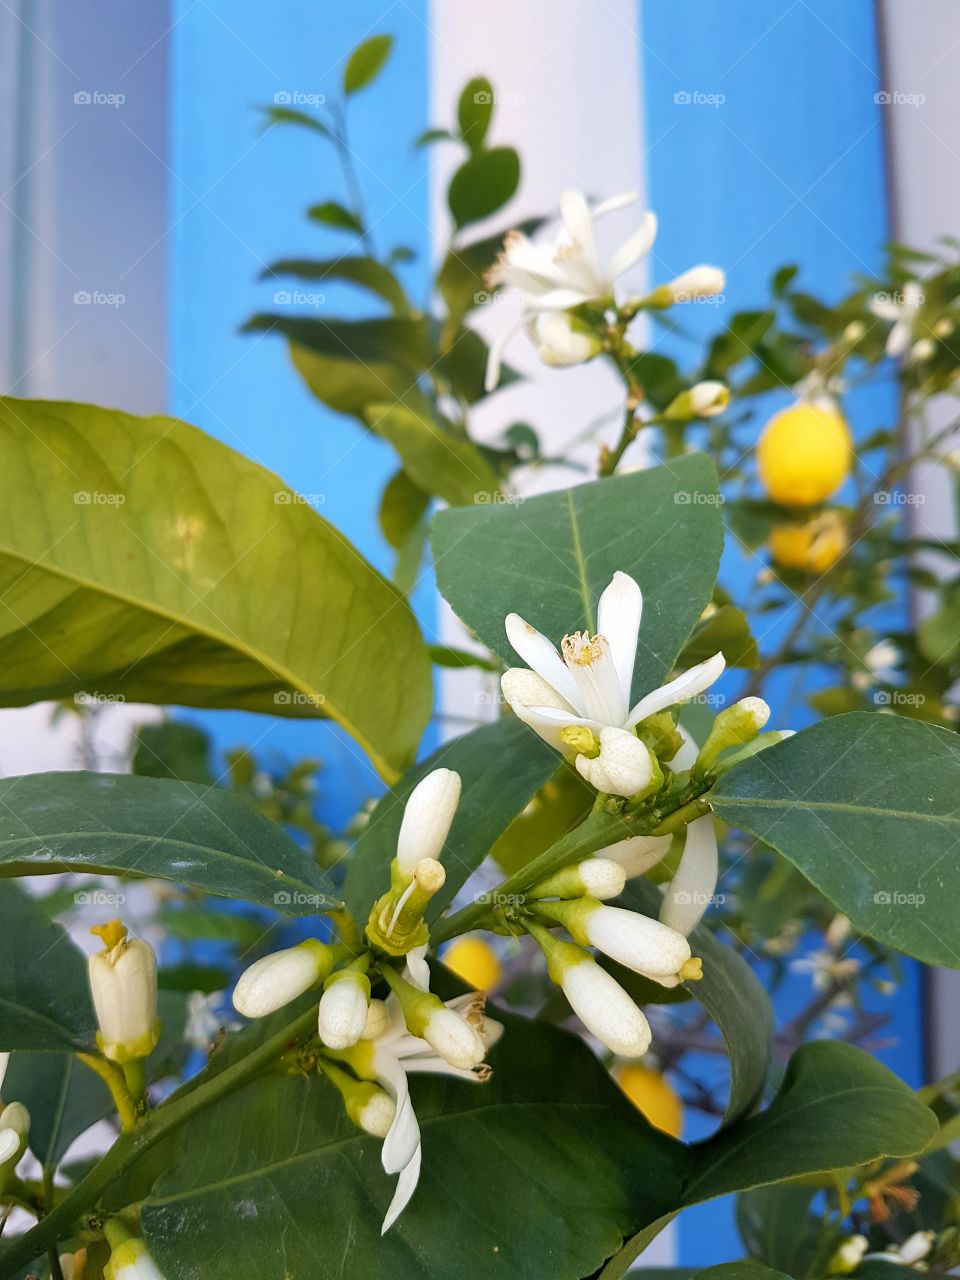 Lemon tree in bloom with blue background